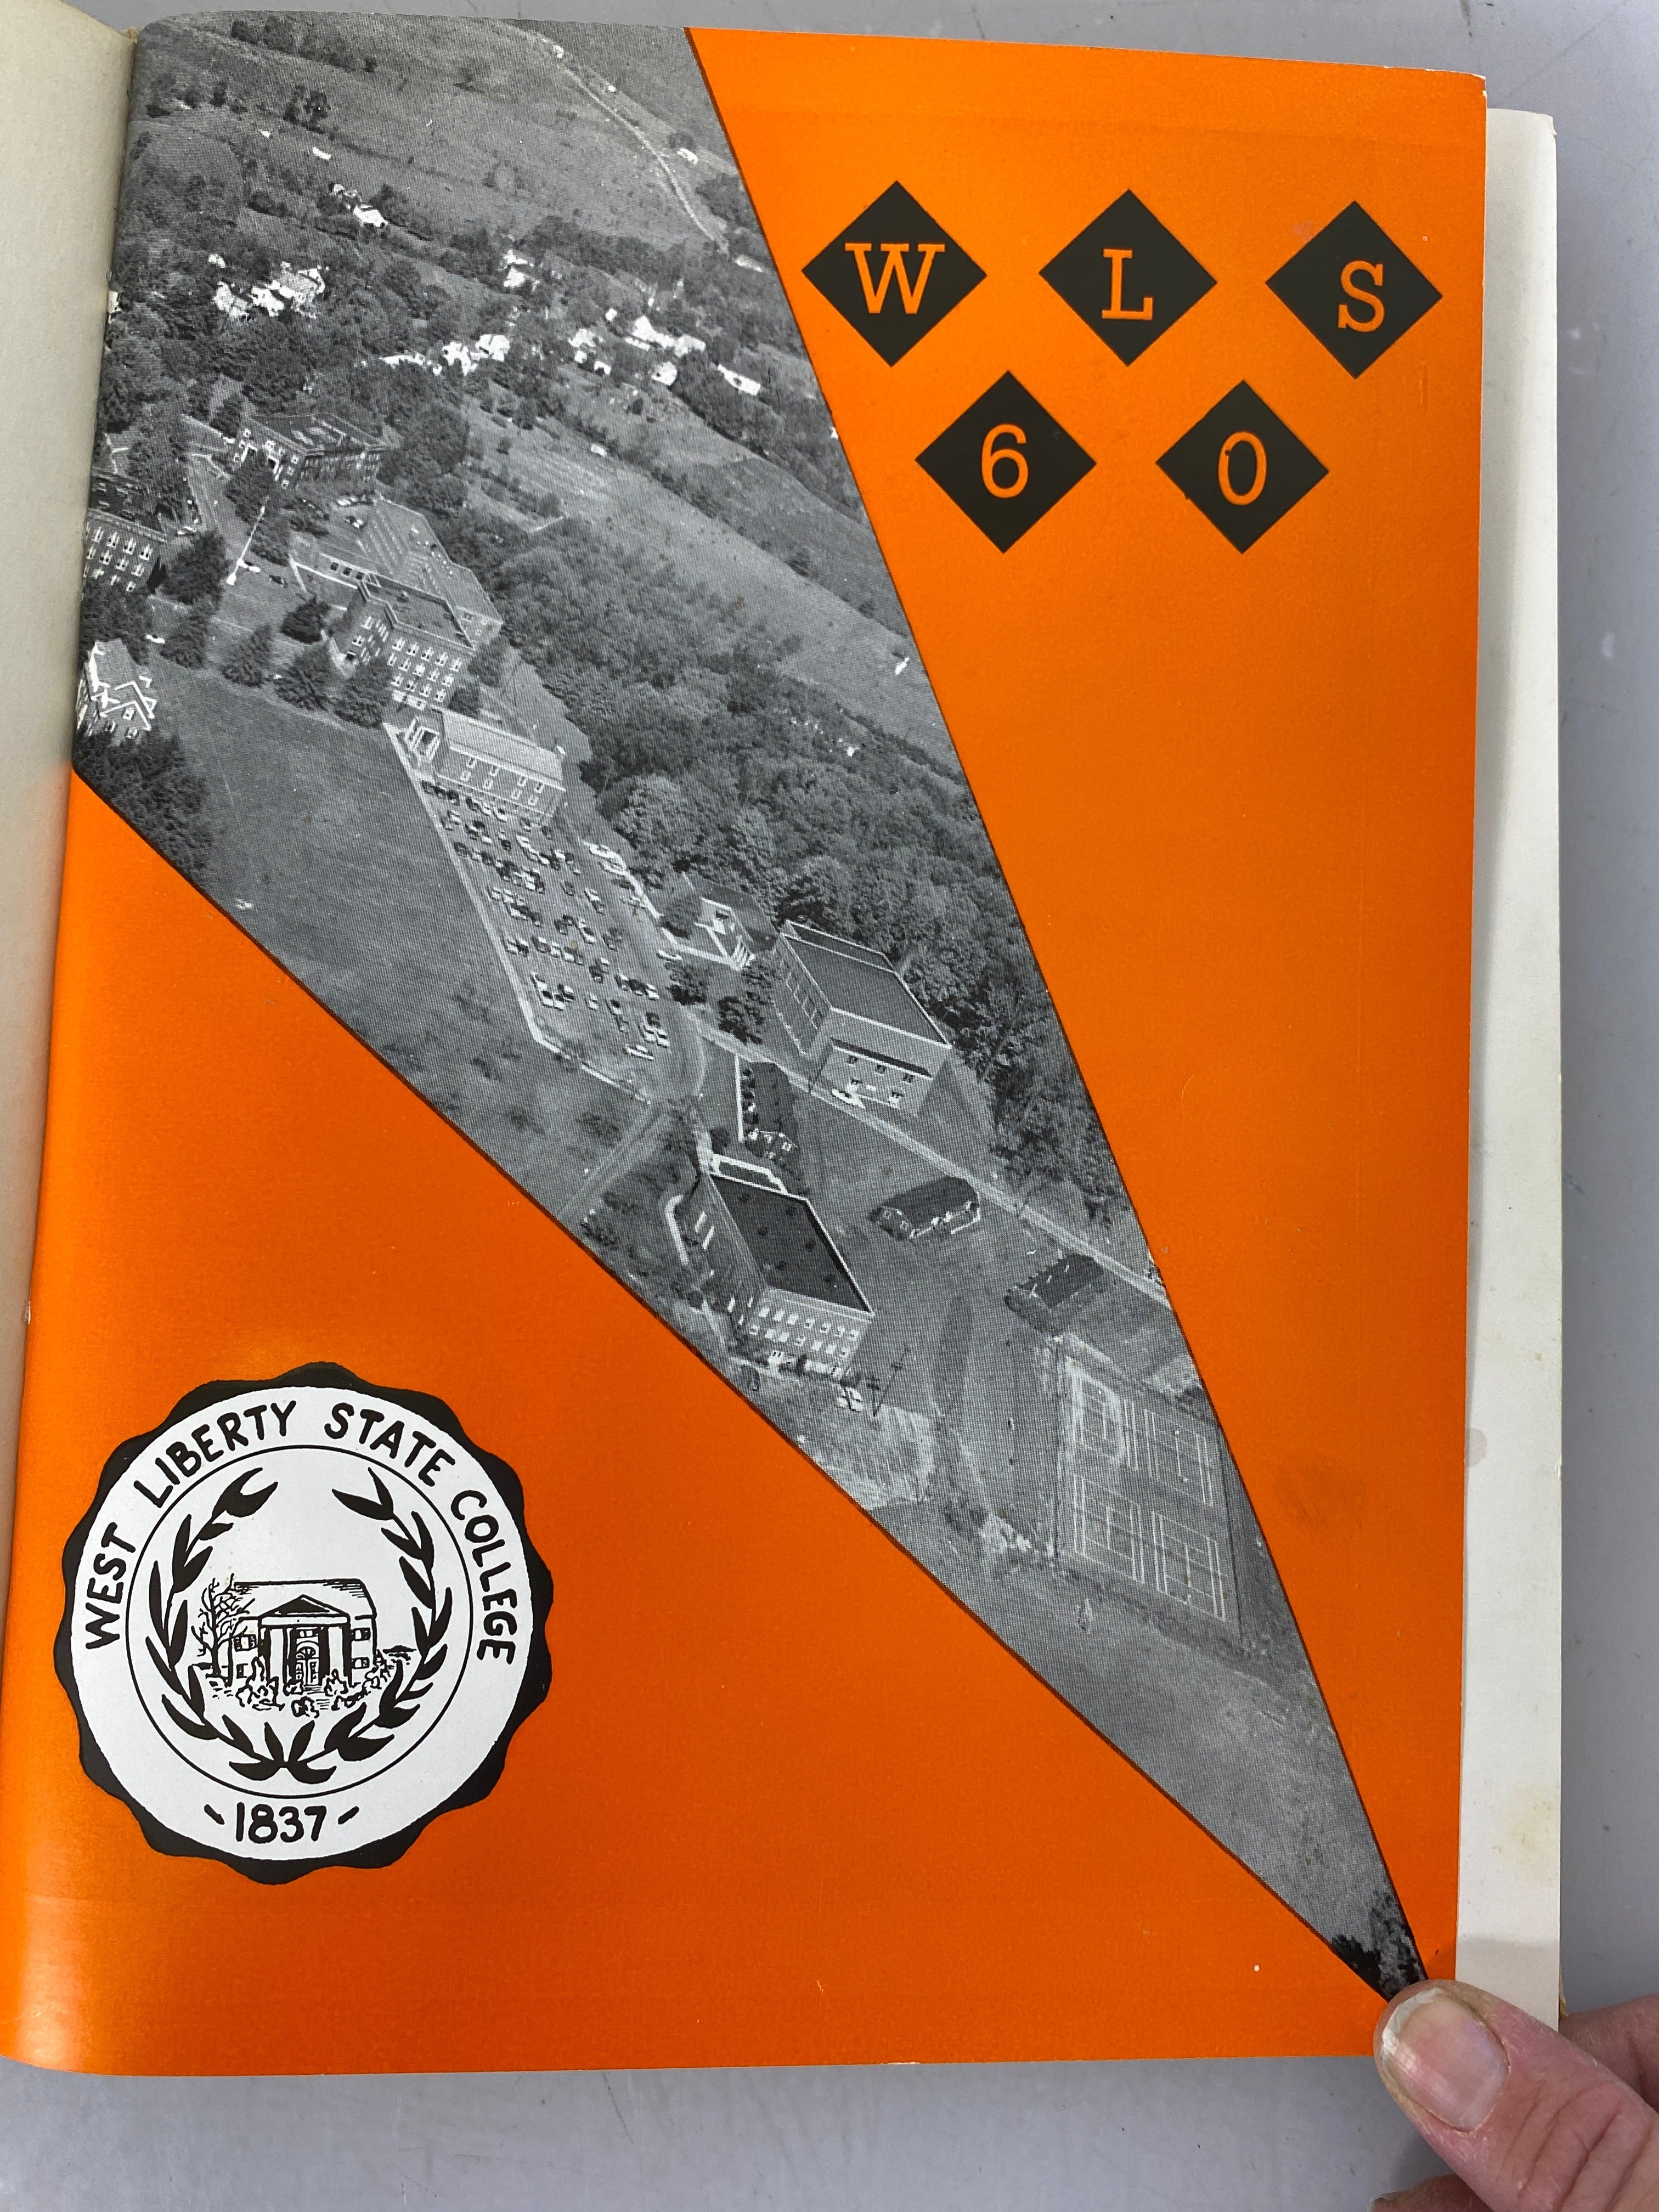 1960 West Liberty State College Yearbook West Liberty West Virgina